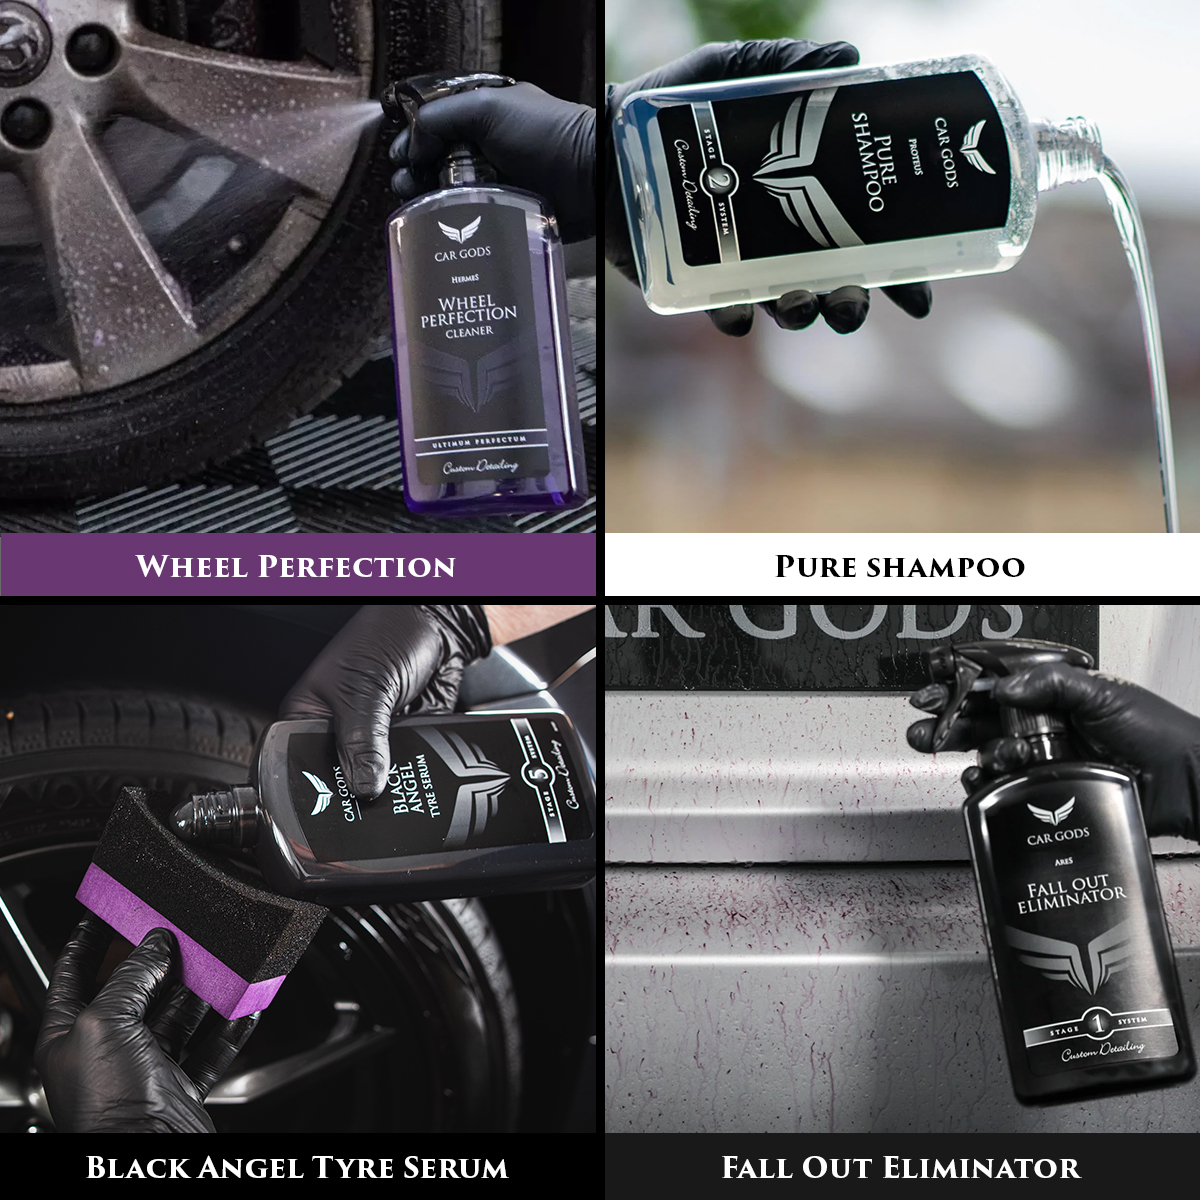 Image shows the following products in use: Wheel Perfection Cleaner, Pure Shampoo, Black Angel Tyre Serum, and Fall Out Eliminator.